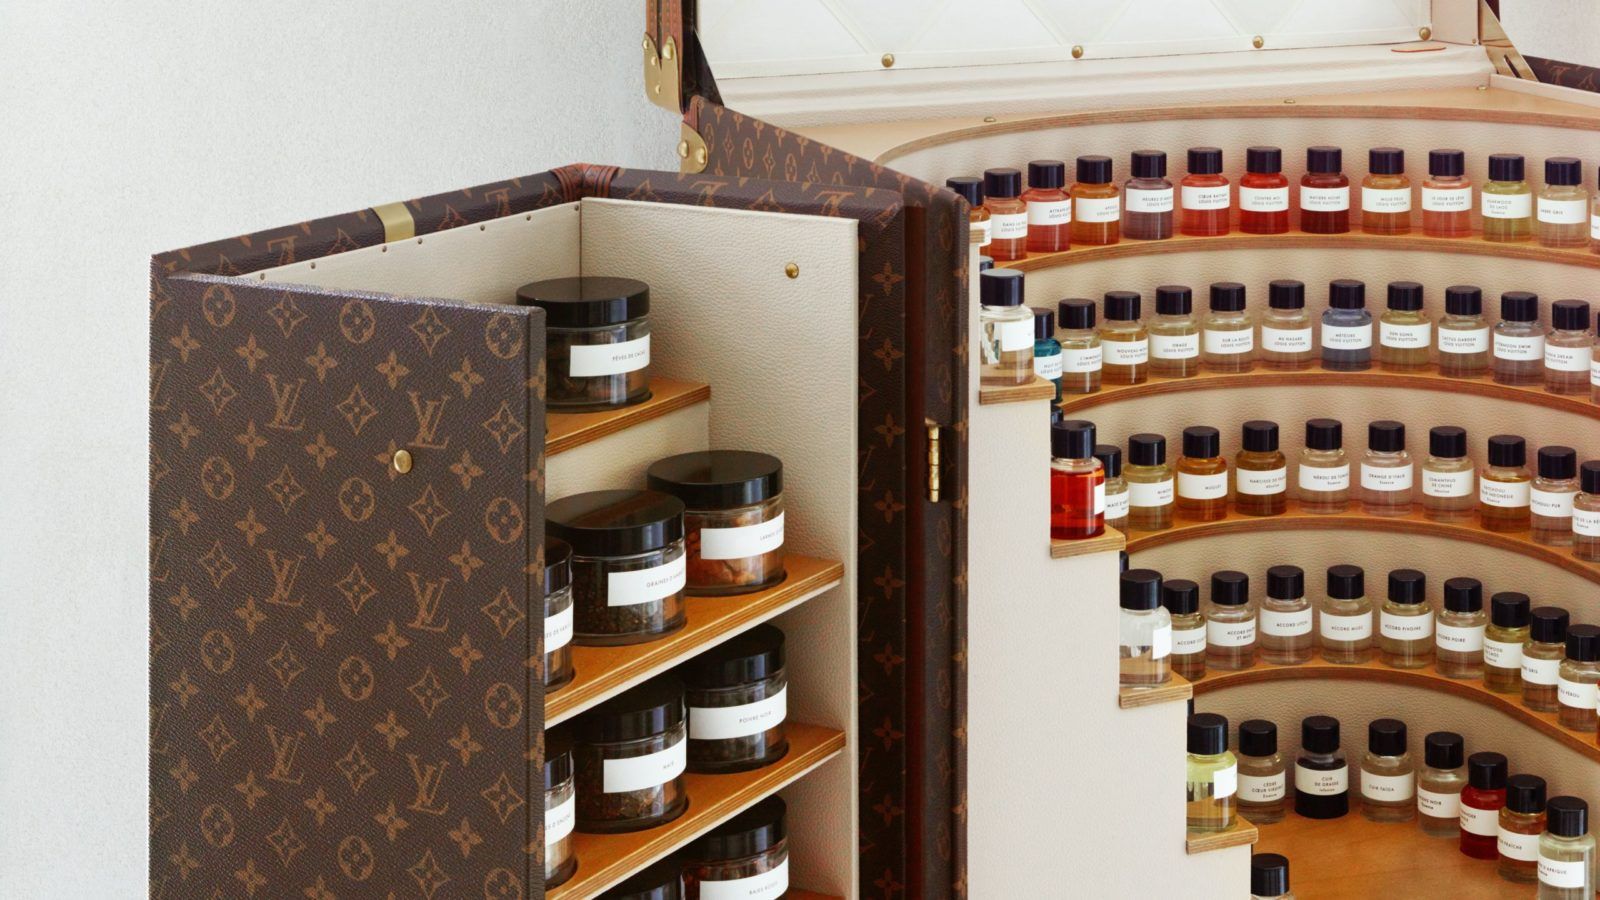 Louis Vuitton launches bespoke fragrances housed in the iconic travel trunk